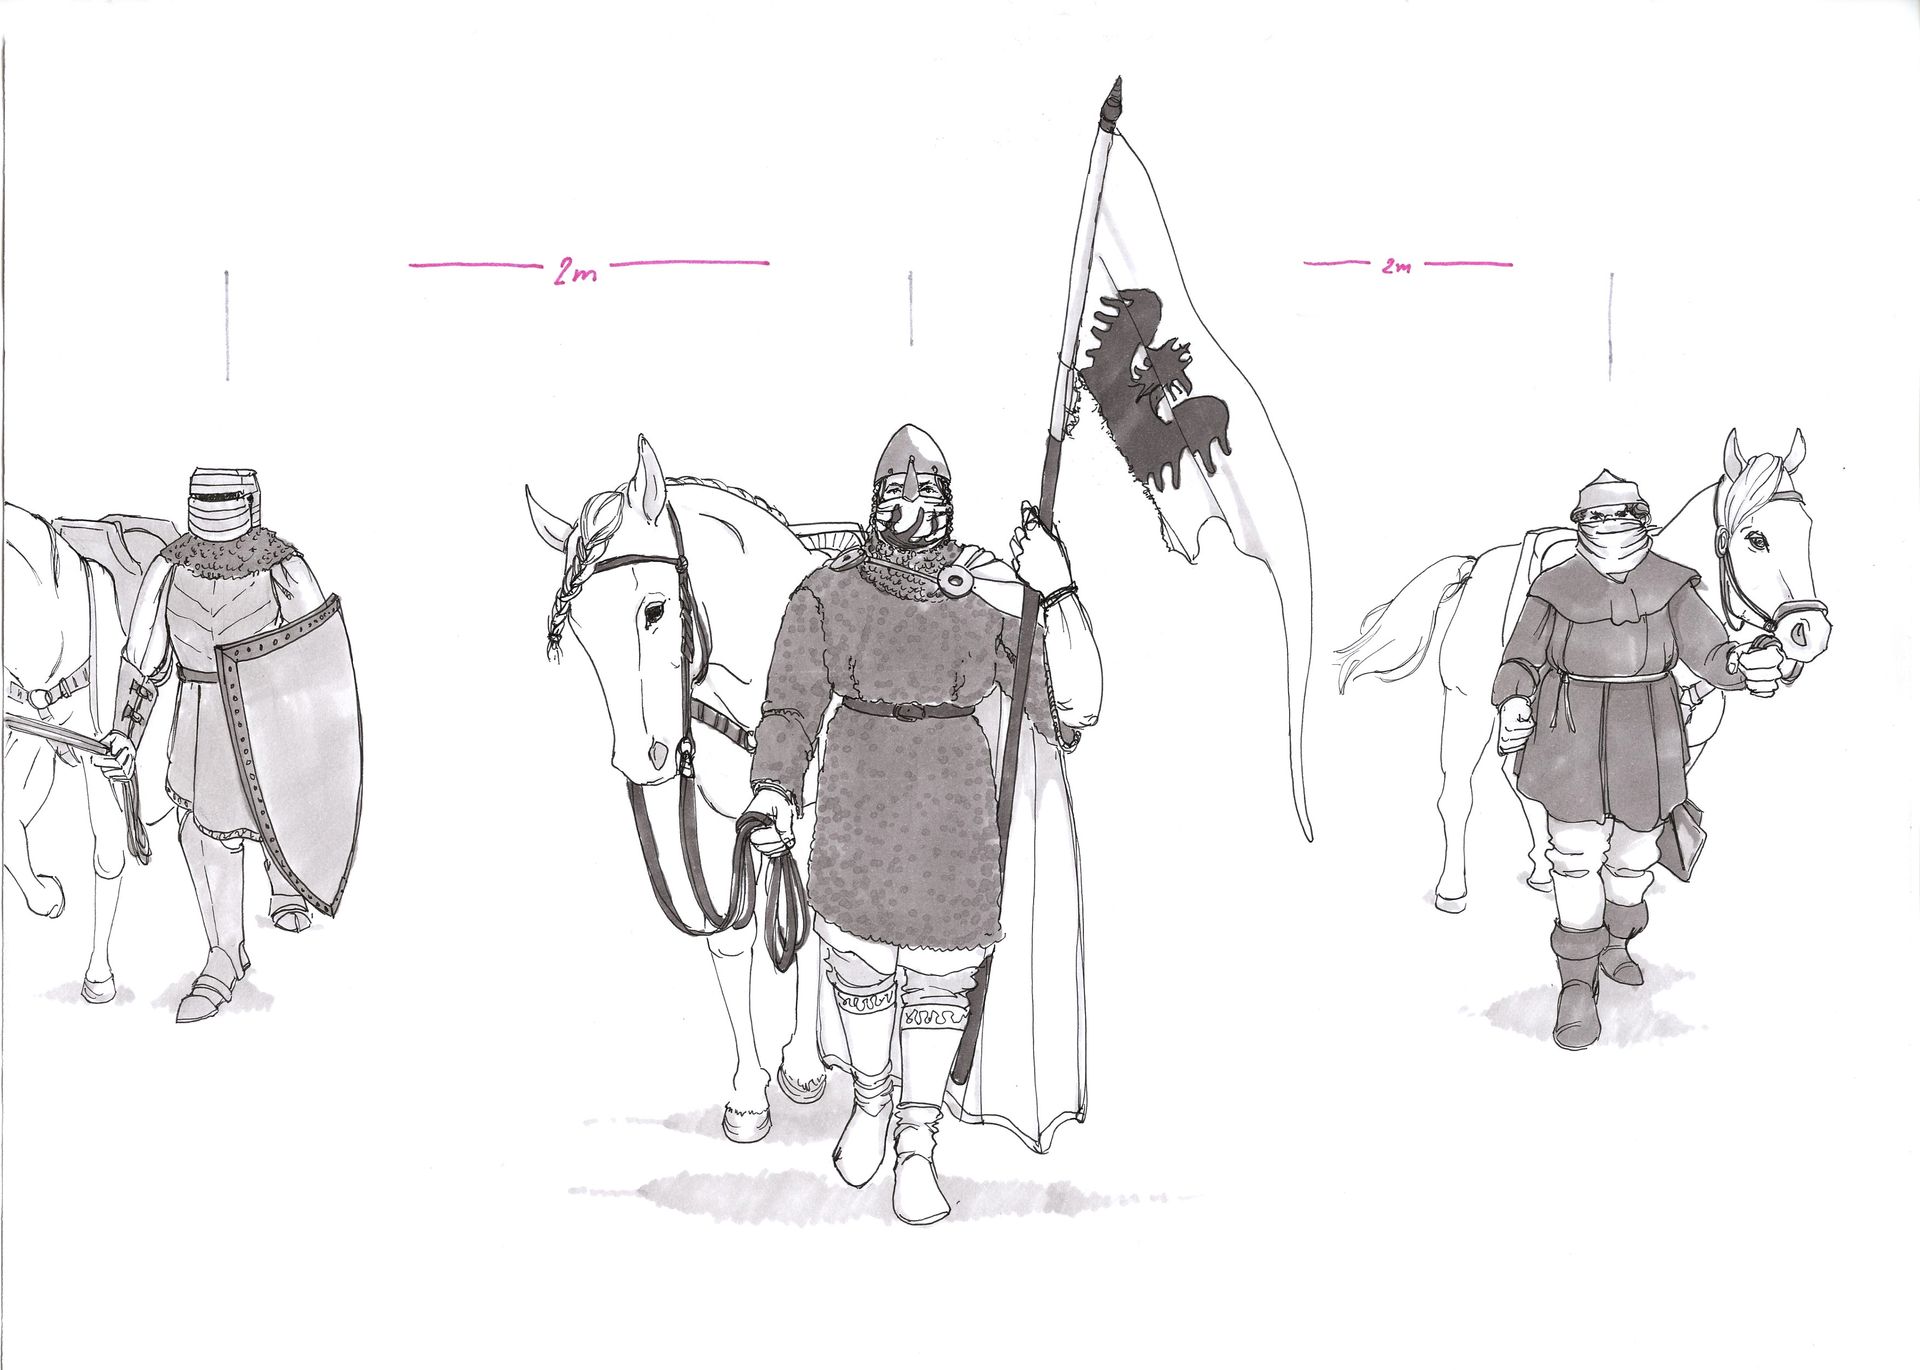 Three armed men leading horses. In the front walks Saint Wenceslaus; he holds a white banner with an eagle, only its bottom part has been torn off to be used as a makeshift face mask. Behind him on the right side walks a stereotypical knight in full armor and helmet, on the other a Hussite with a scarf as a mask. Their distance is marked out with a line and labeled as 2 meters.